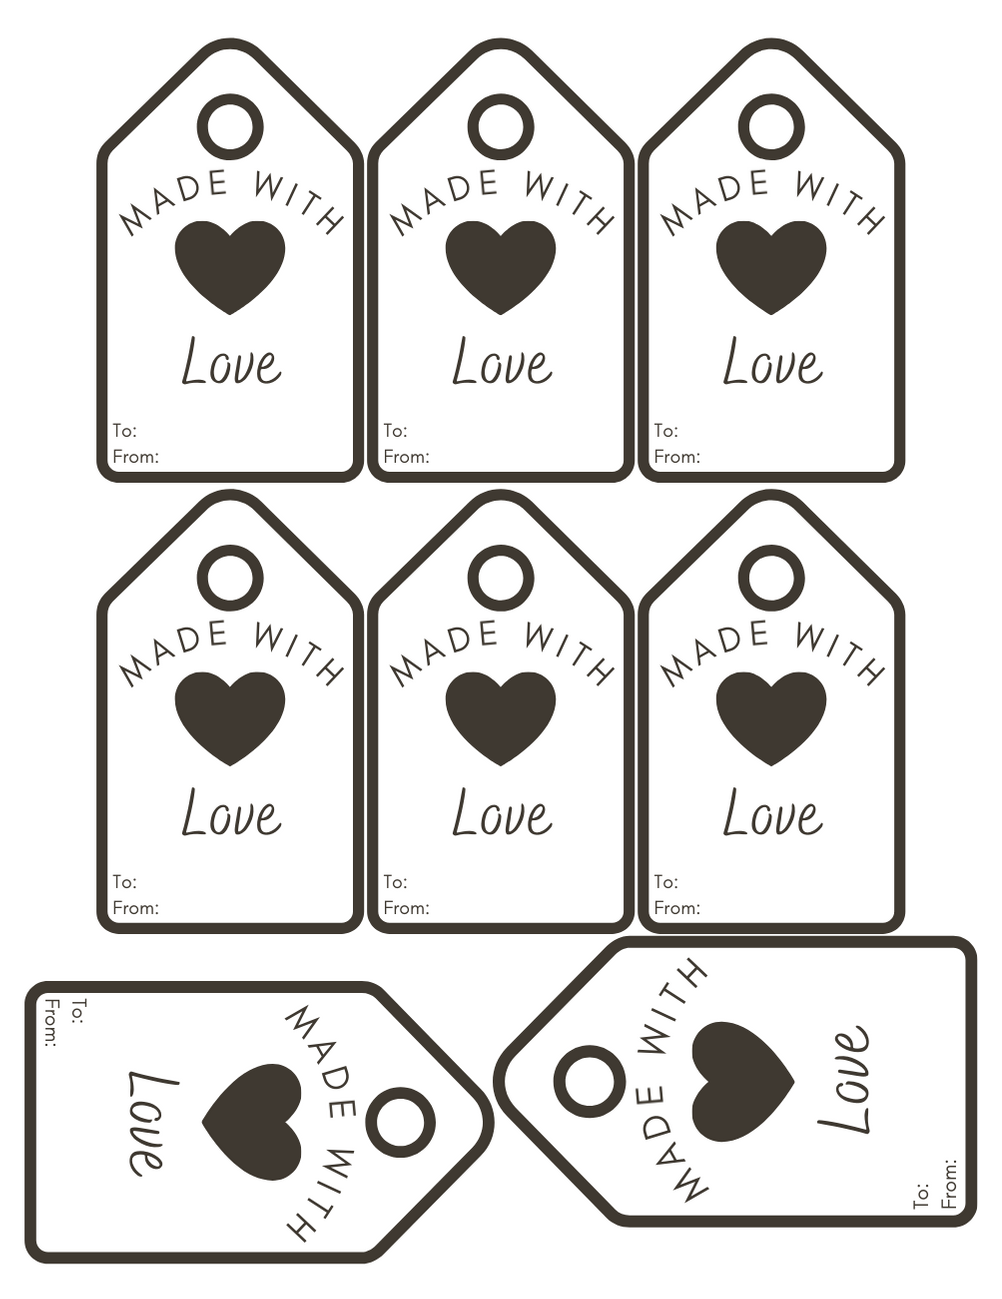 White Homemade with Love Gift Tags / 100 DIY Handmade with Love Gift Tags /  2 x 3.5 Flat Colorful Craft Fair Party Favor Tags/Made in The USA